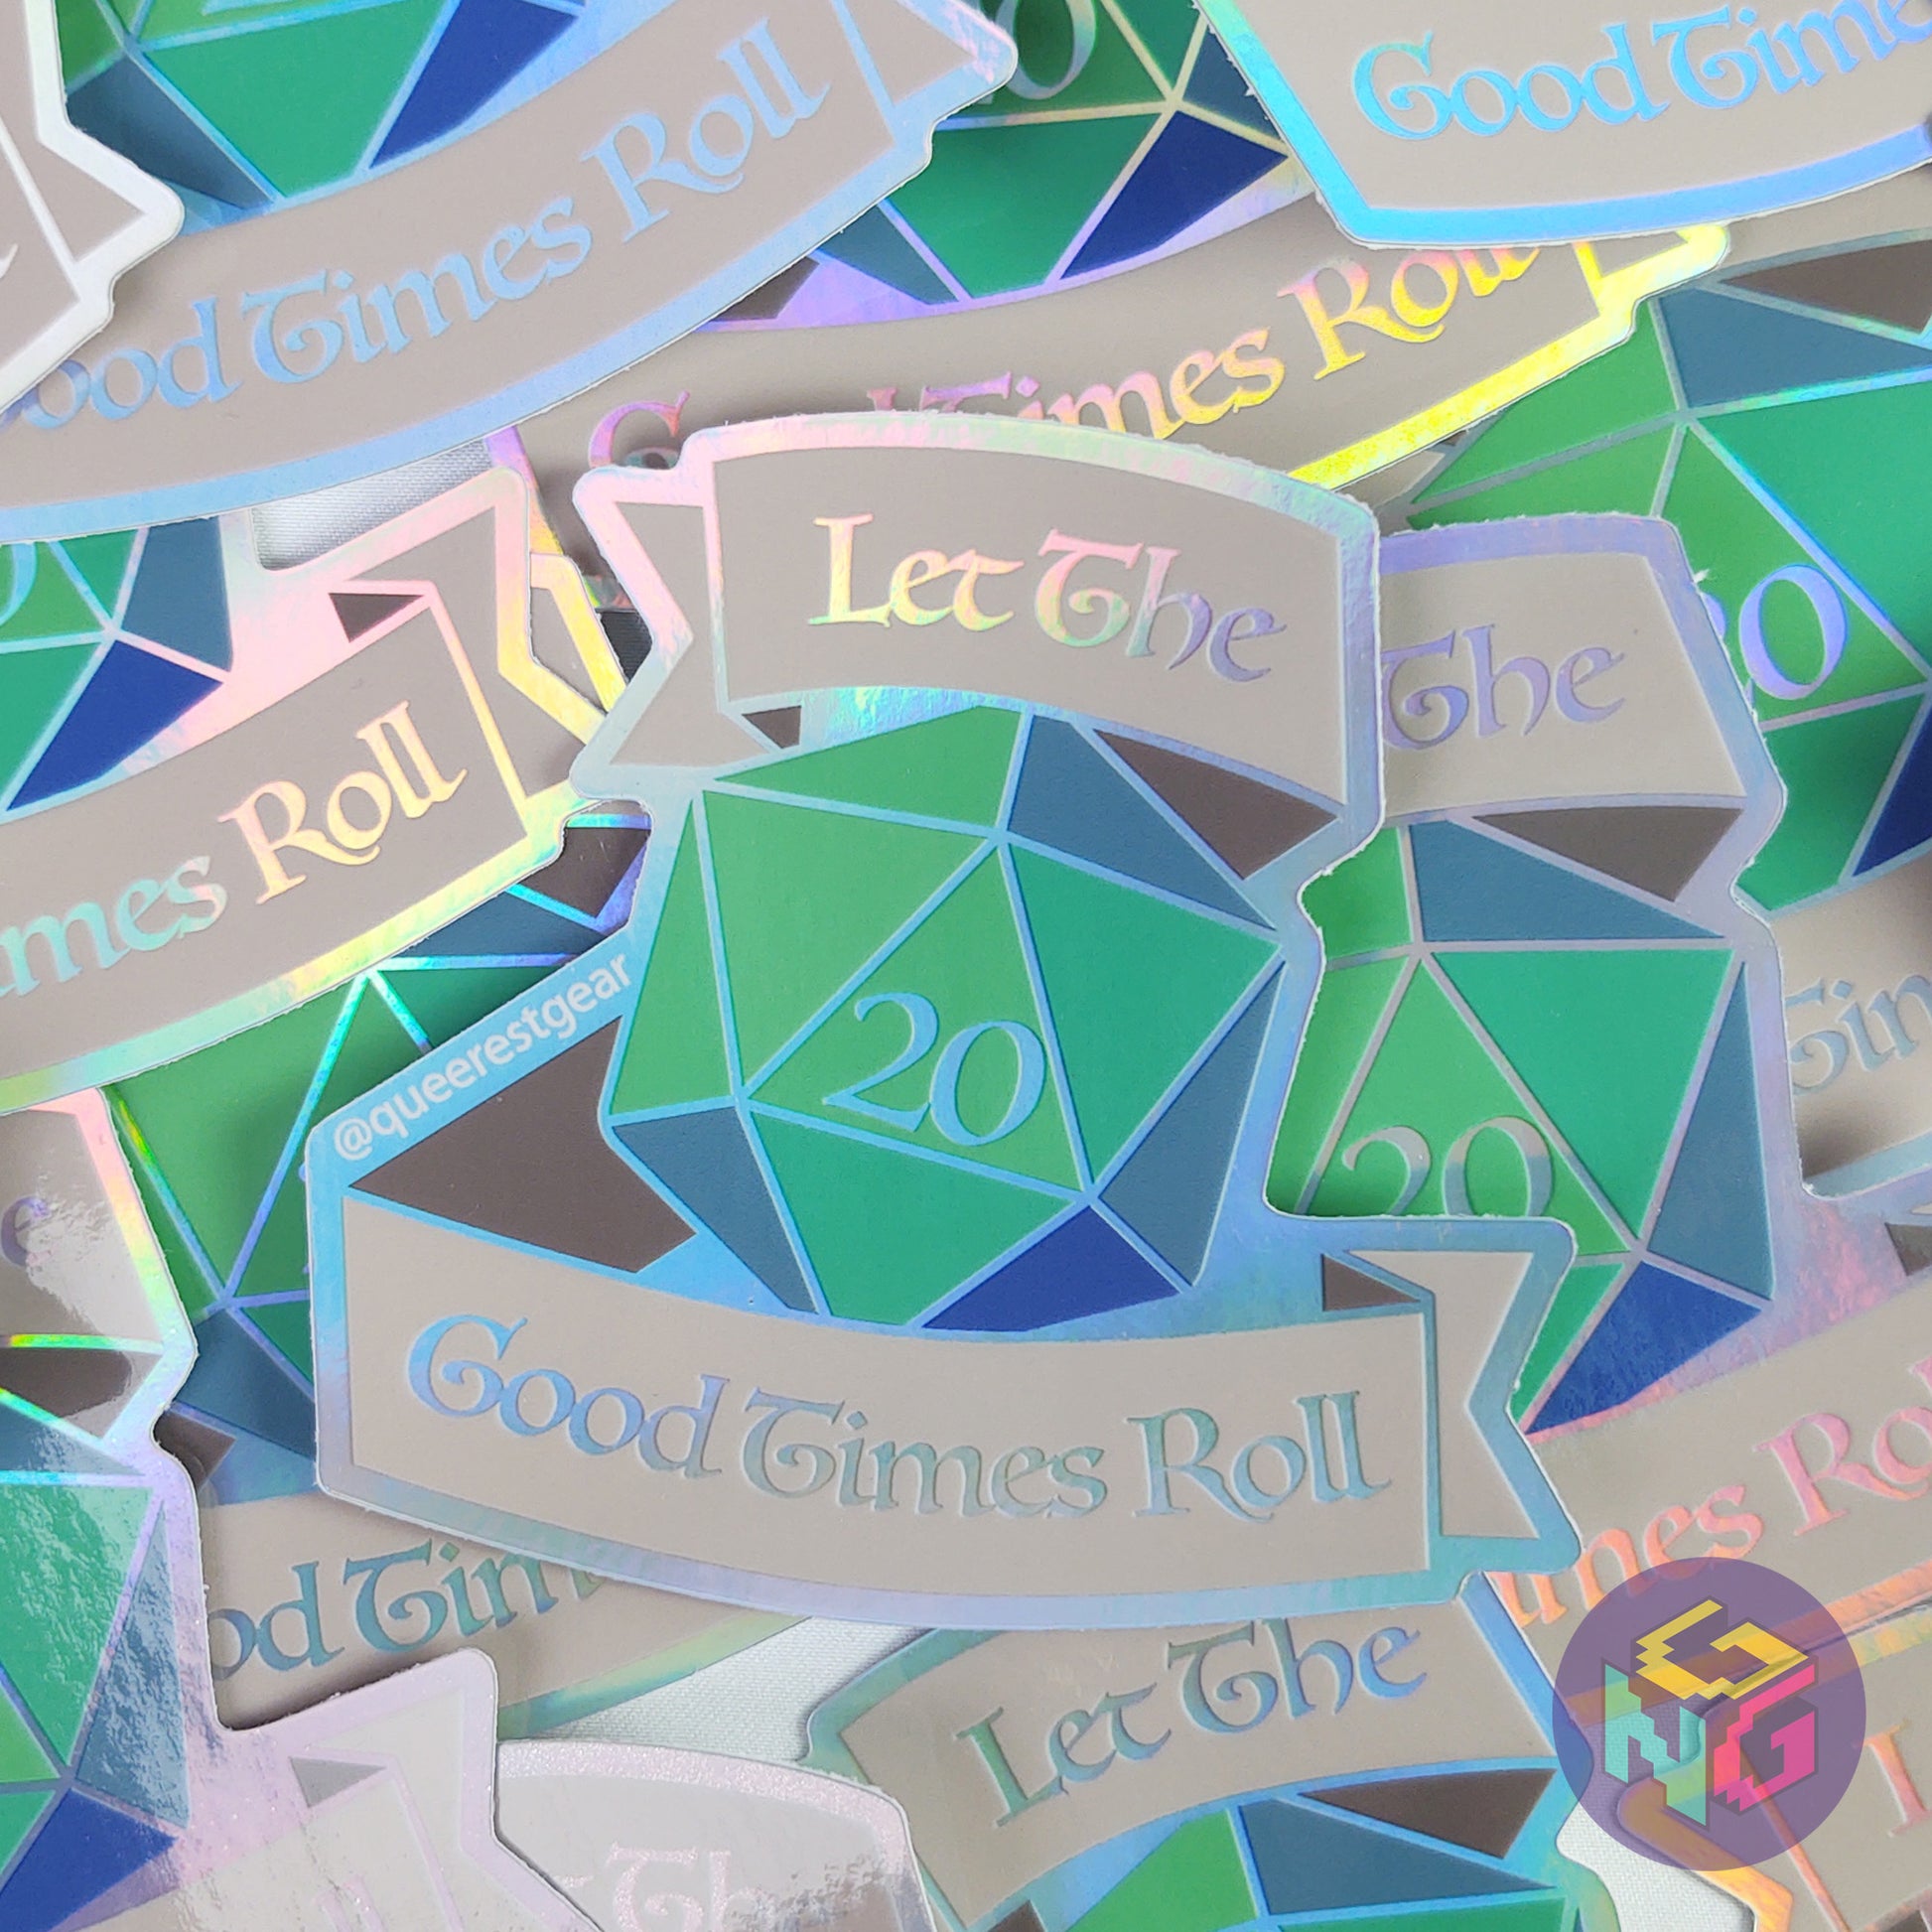 many rainbow holographic let the good times roll d20 vinyl stickers scattered in a pile